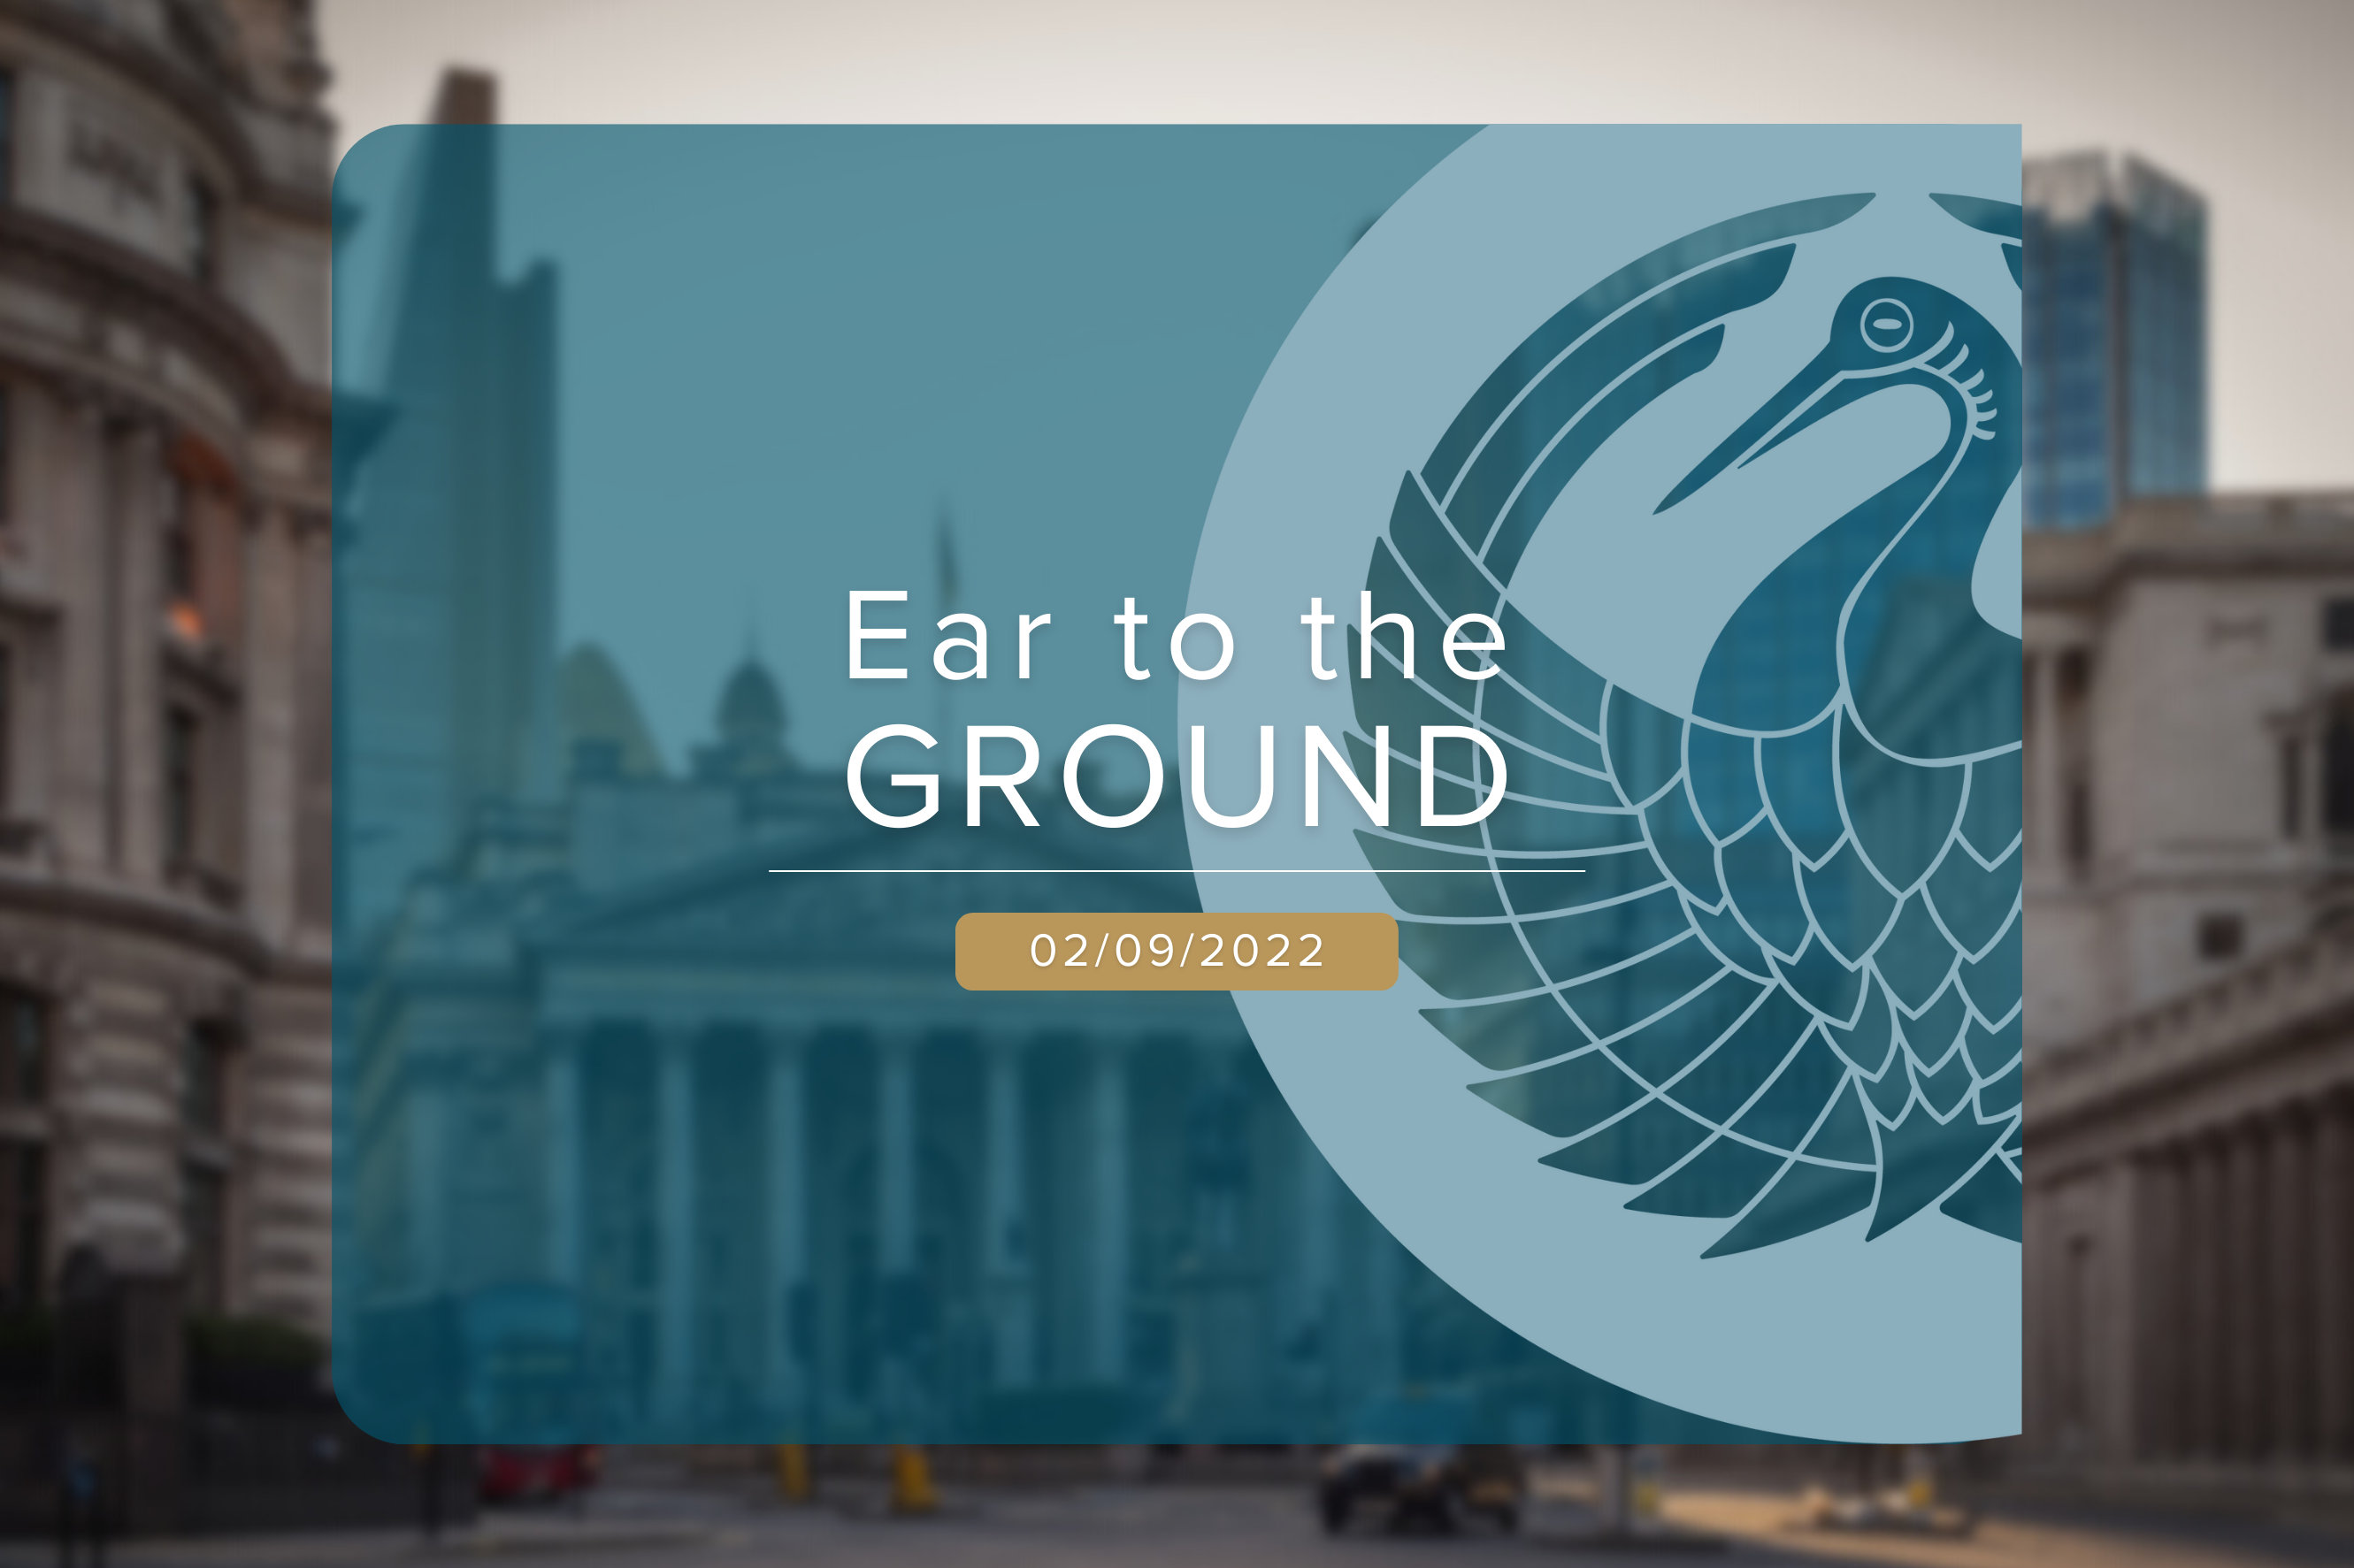 Ear to the ground 02/09/22